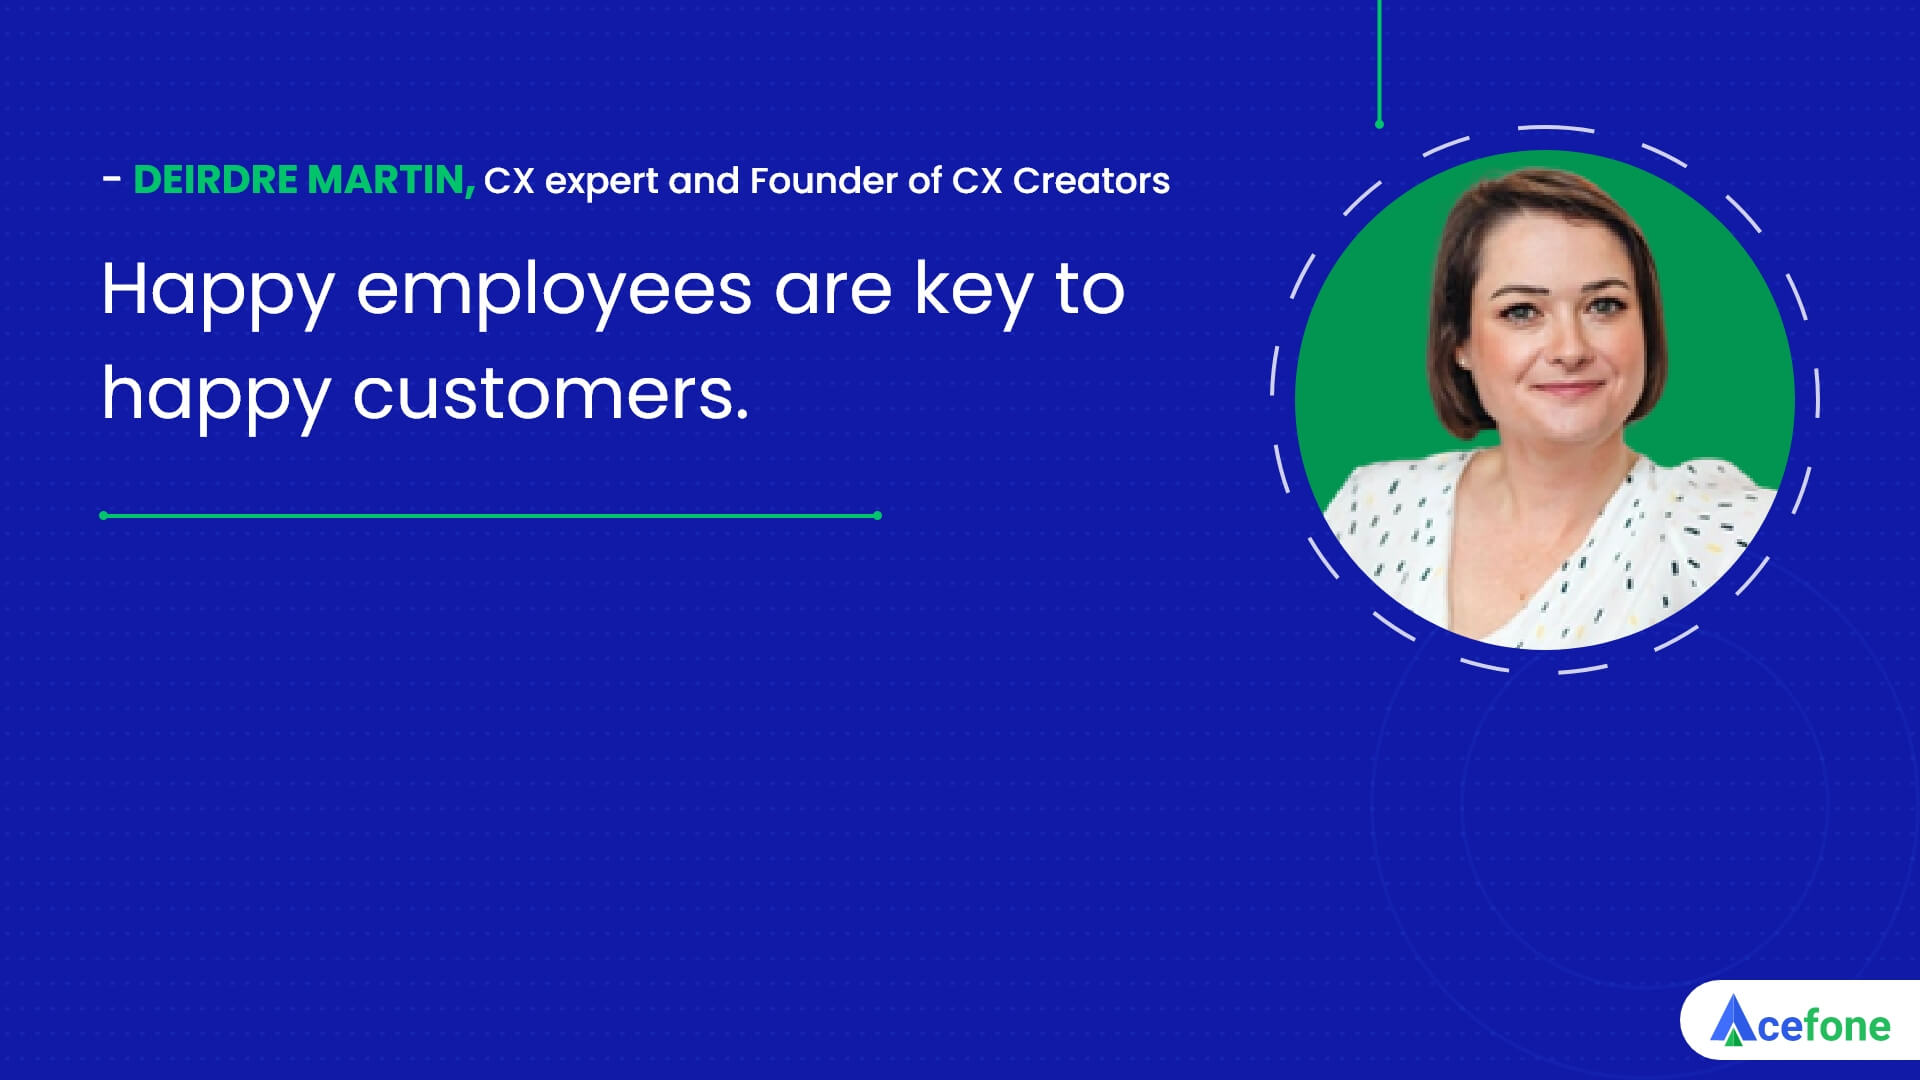 Deirdre Martin on How Happy Employees are Key to Happy Customers